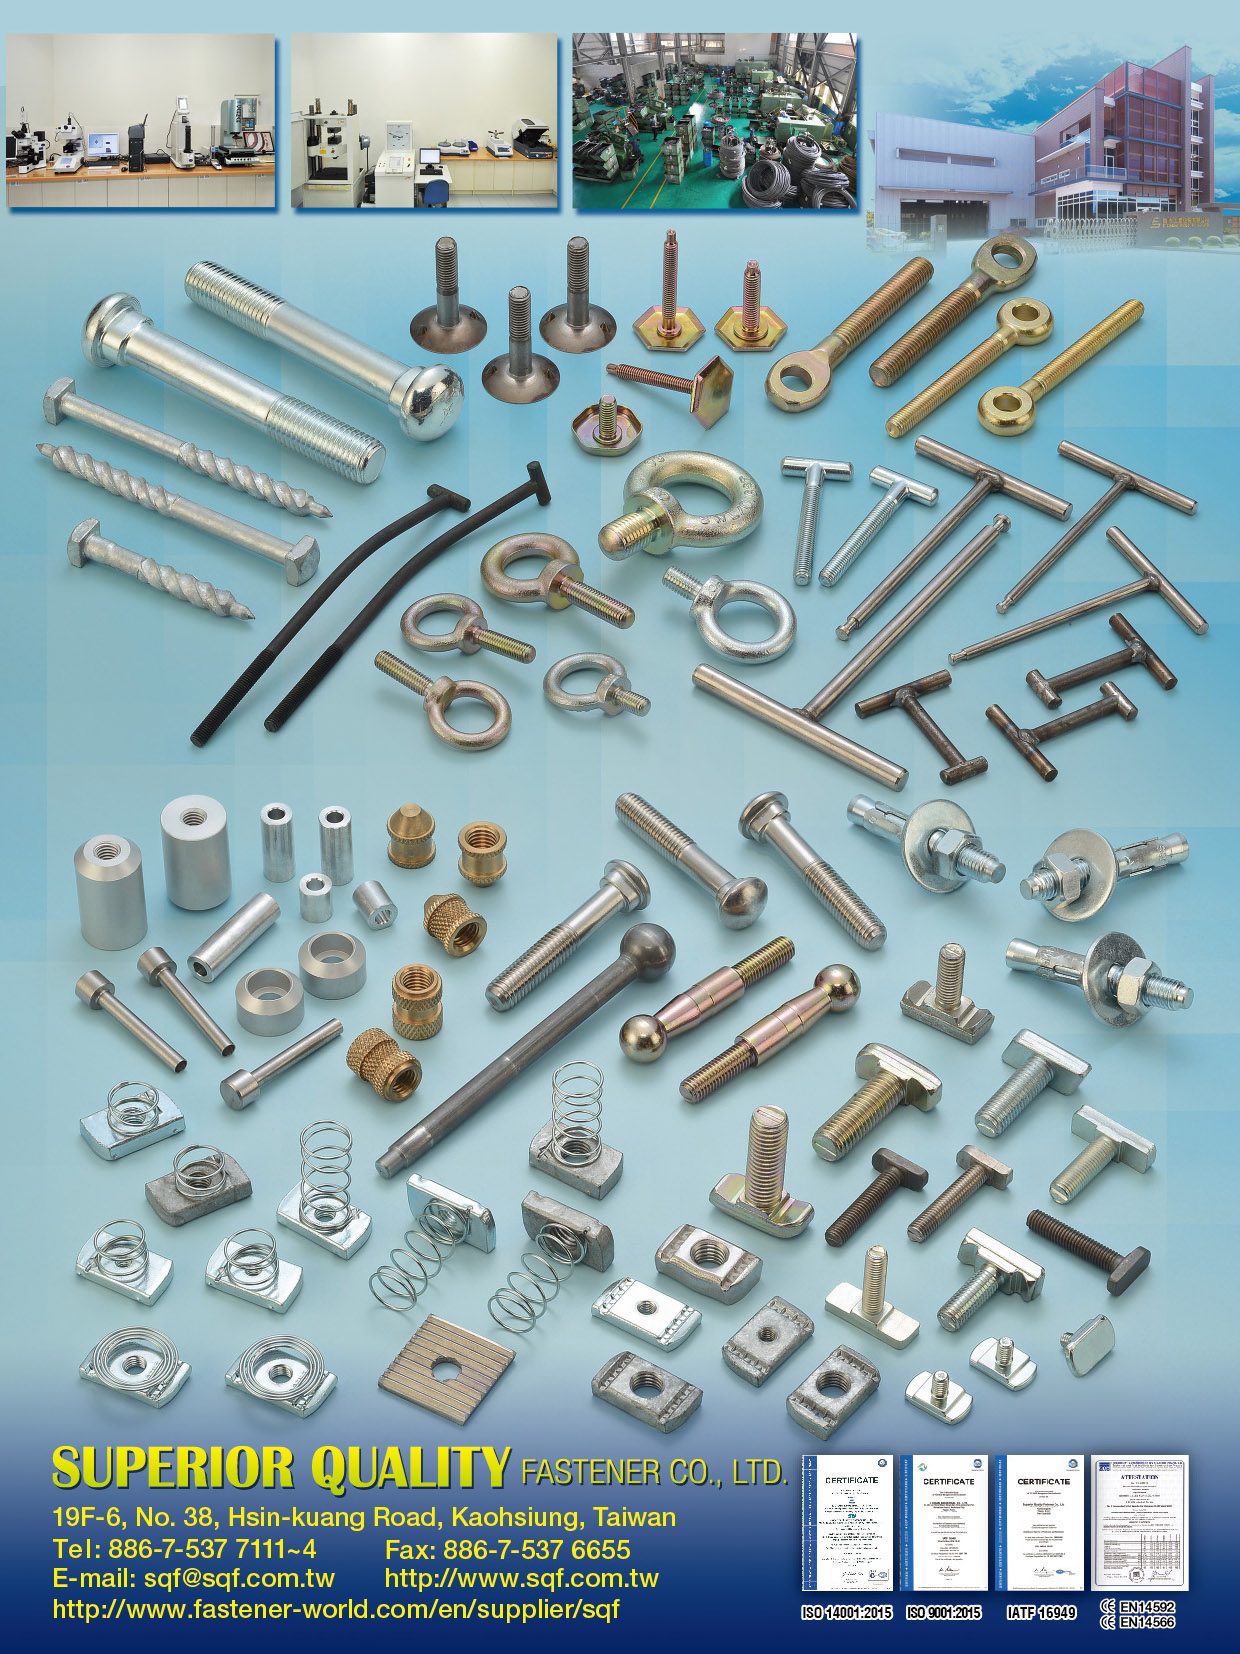 SUPERIOR QUALITY FASTENER CO., LTD.  , Close Dies Parts, Welding Bushing & Welding Nut, Turning Parts, Stamping parts, Weld Screw, Drywall Screws & Self-Drilling Screws, Chipboard screws & Tapping screw, Carriage Bolts & Machine Screws, Eye Bolts & Thread Rod & Spring Nuts, OVAL TRACK BOTL, SLEEVE ANCHOR, T BOLT, T HANDLE, ELEVATOR BOLT, EYE BOLT, LUG NUT , All Kinds of Screws